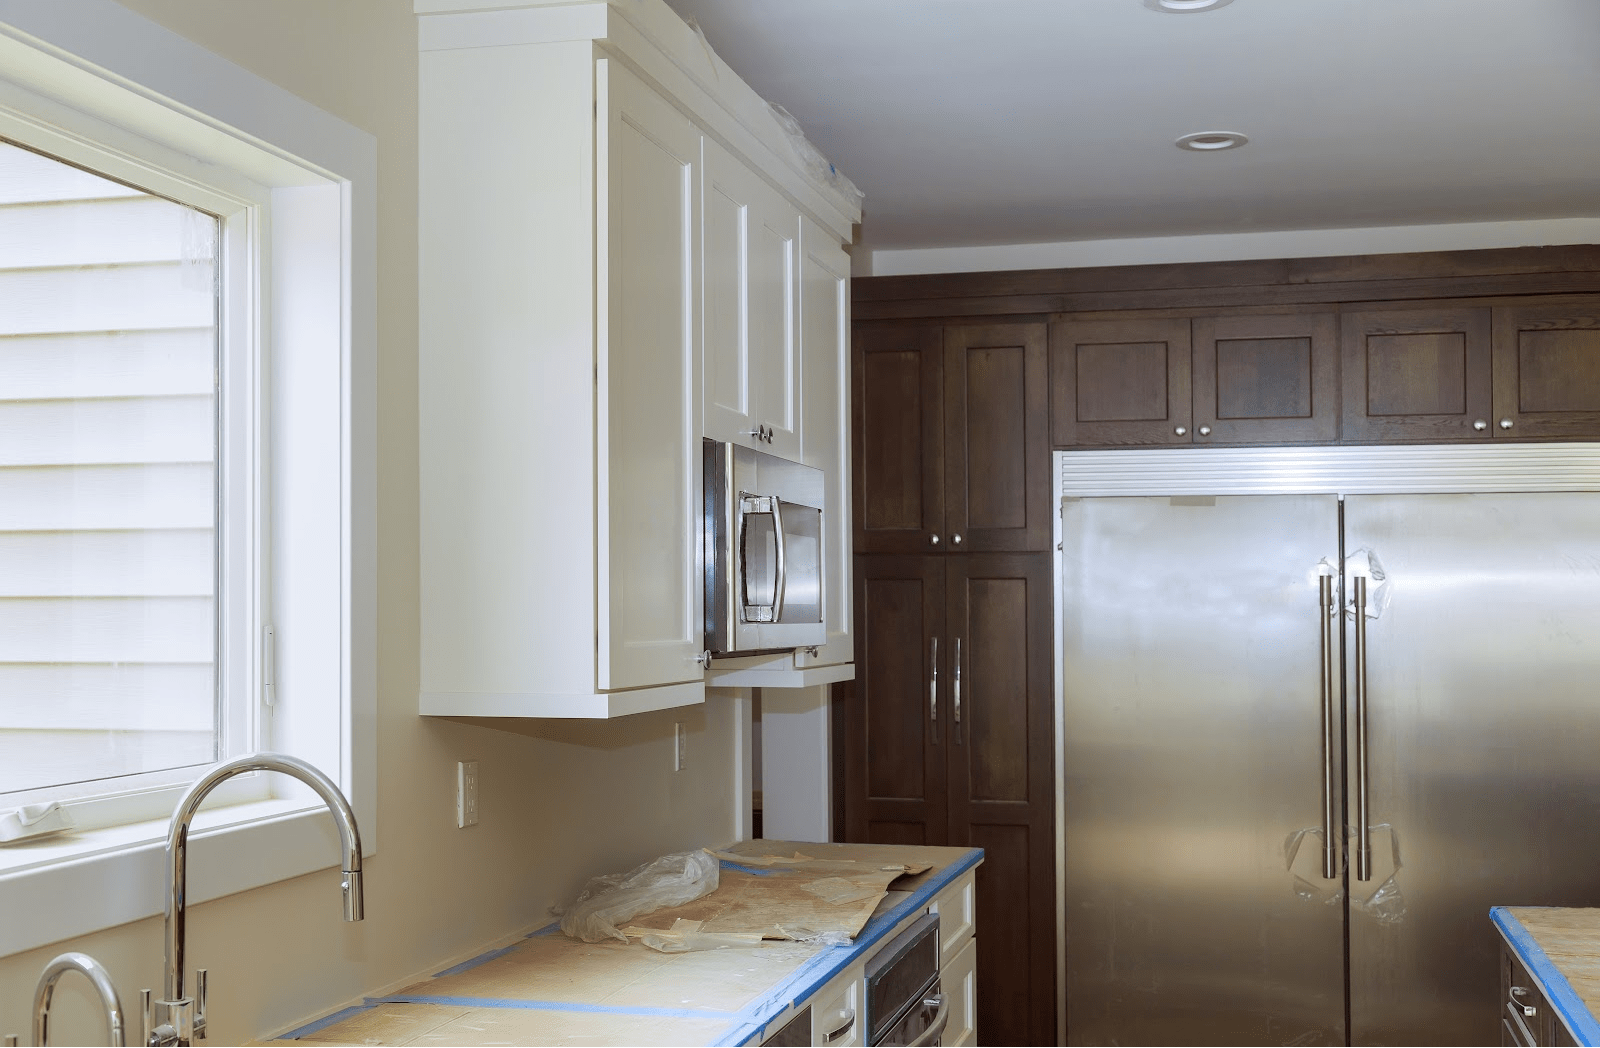 Why You Should Replace Your Kitchen Cabinets During A Remodel